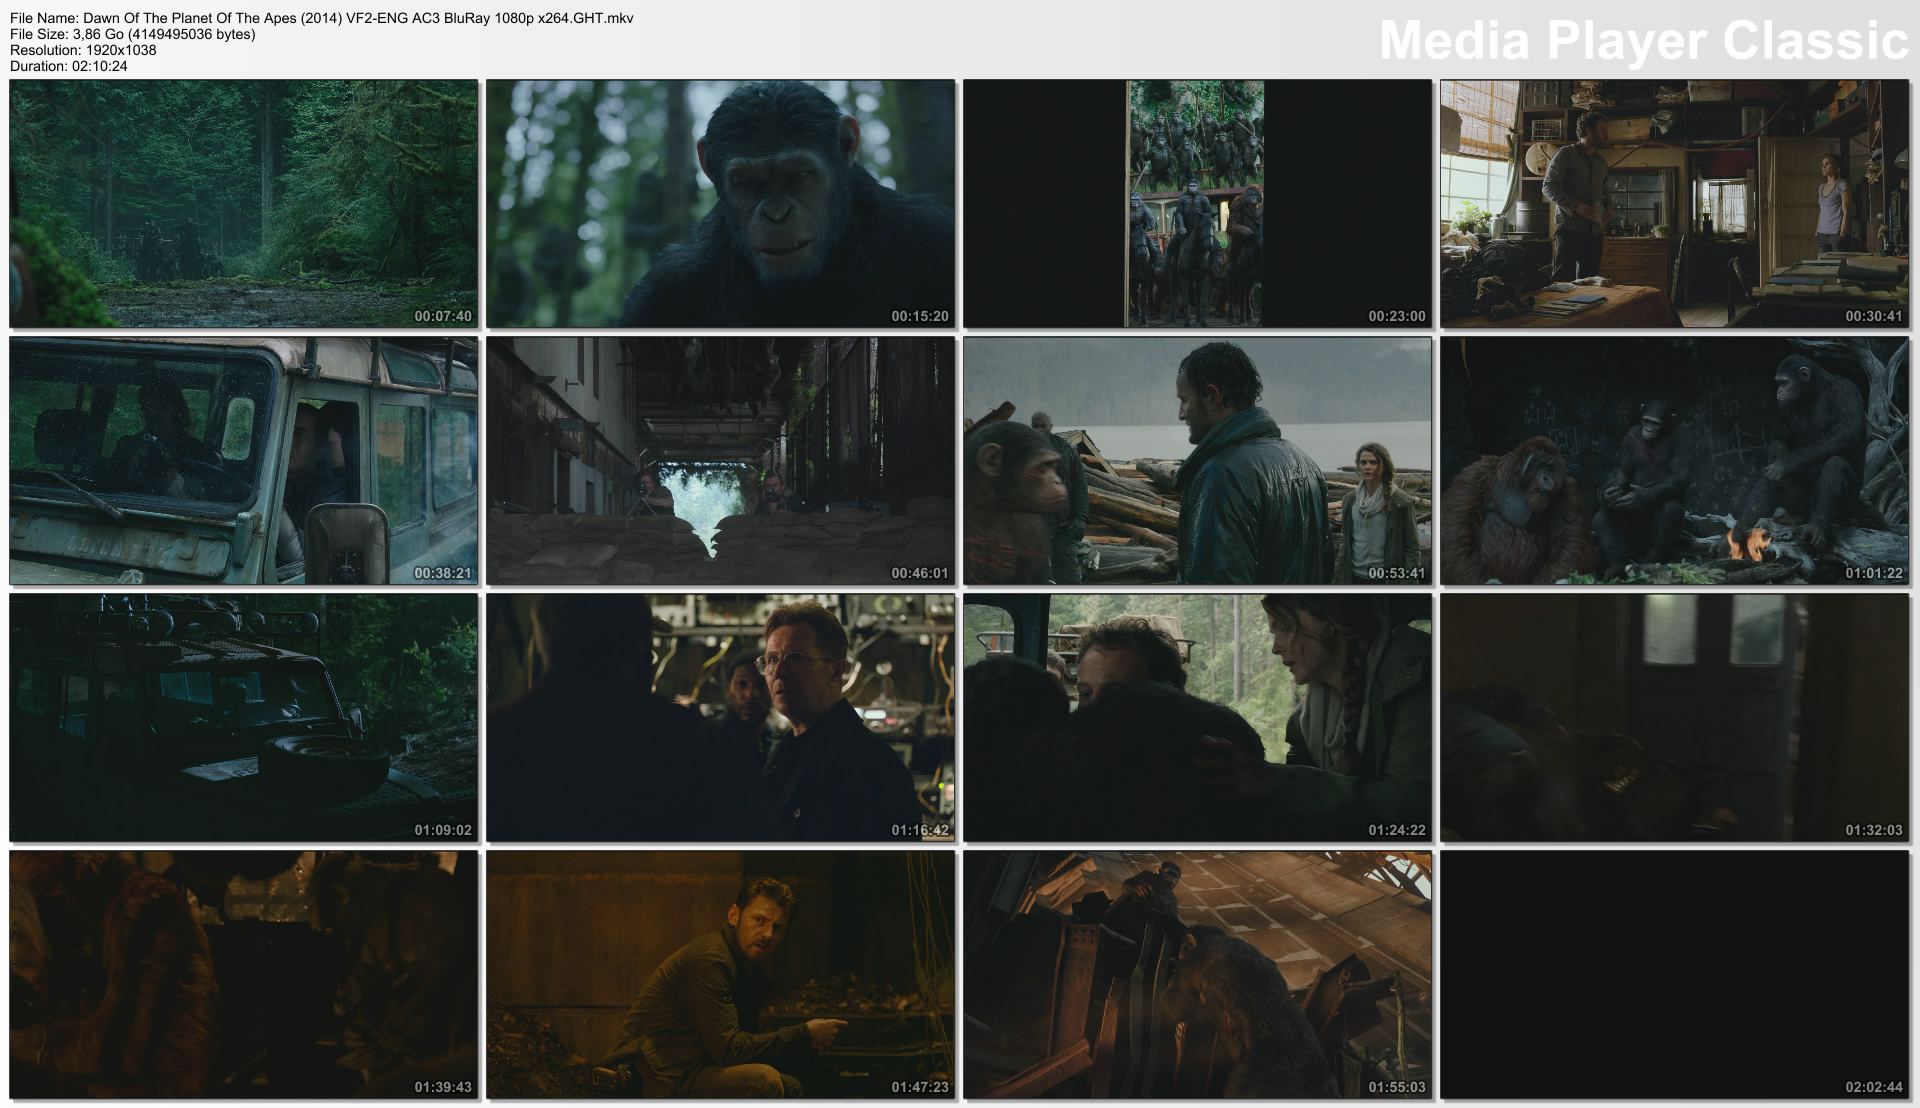 Dawn Of The Planet Of The Apes (2014) VF2-ENG AC3 BluRay 1080p x264.GHT